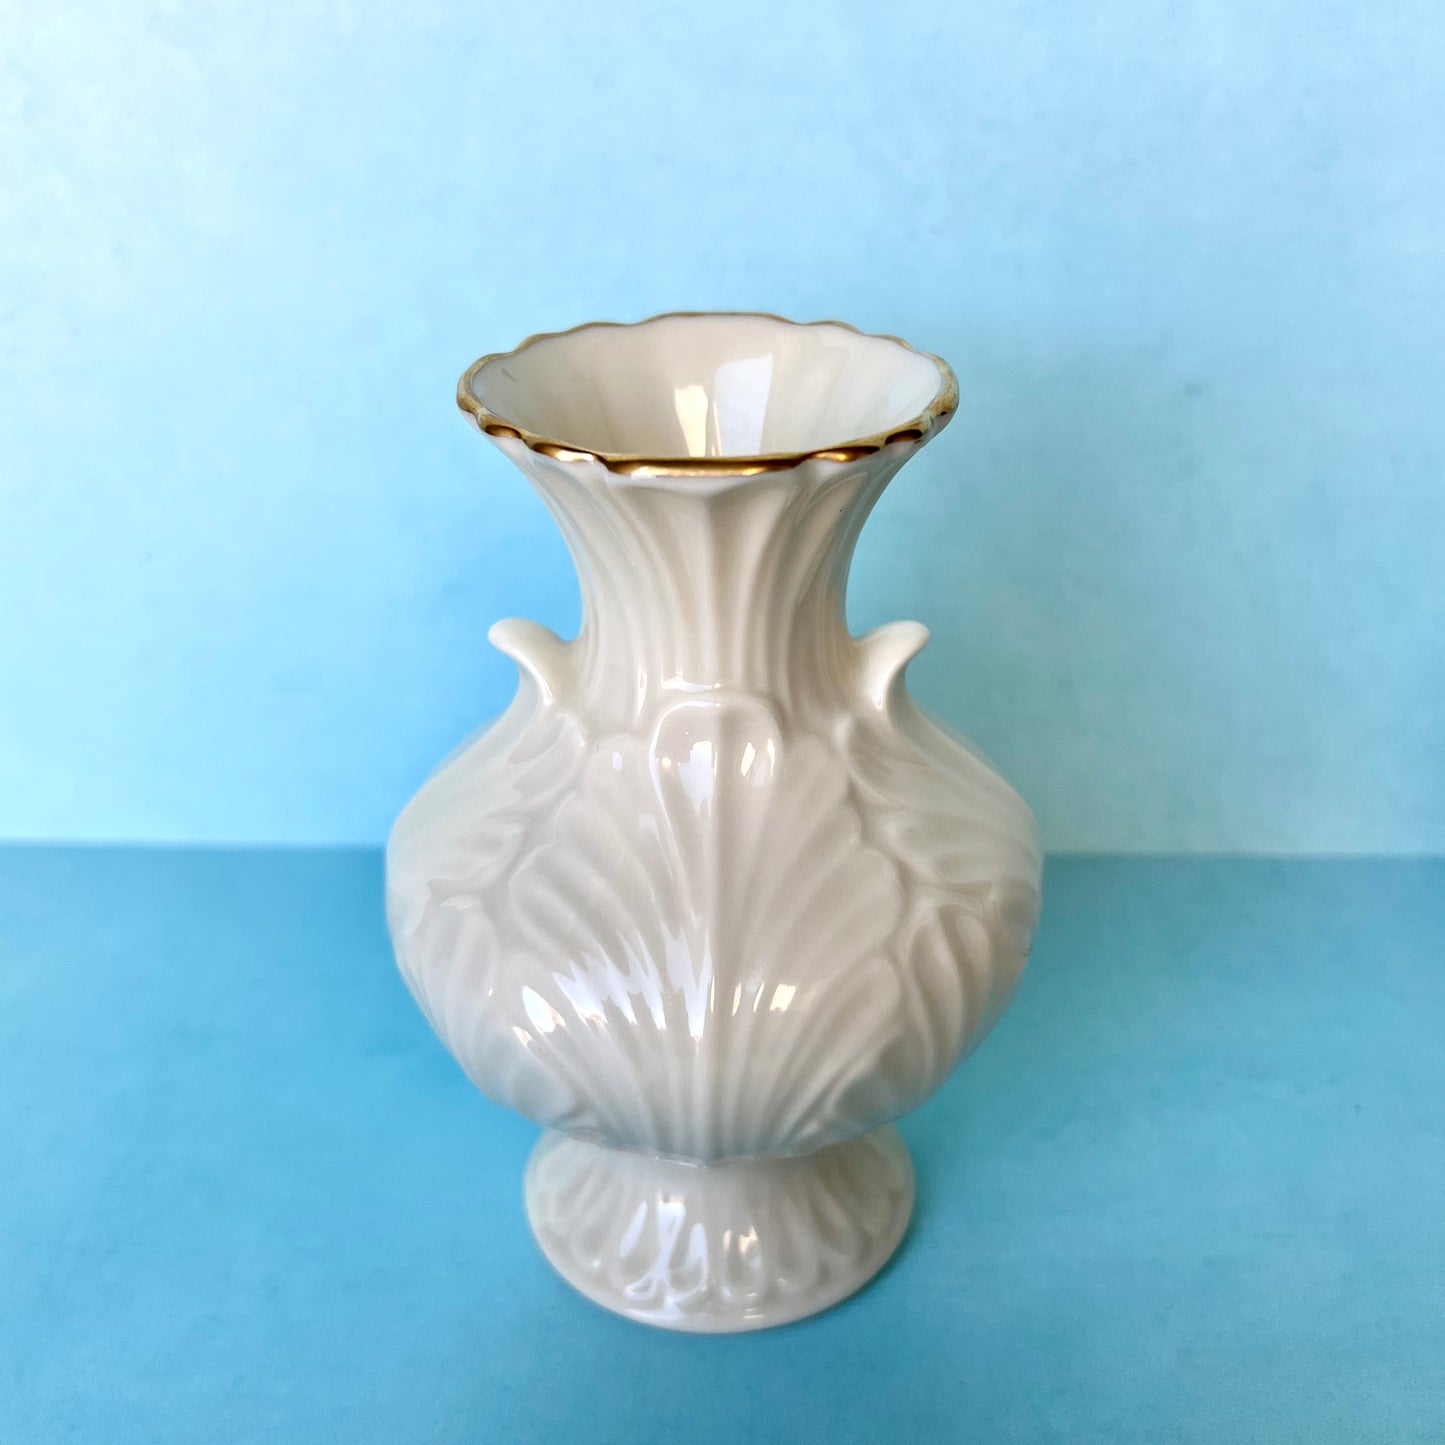 A white bud vase with gold trim against a blue background